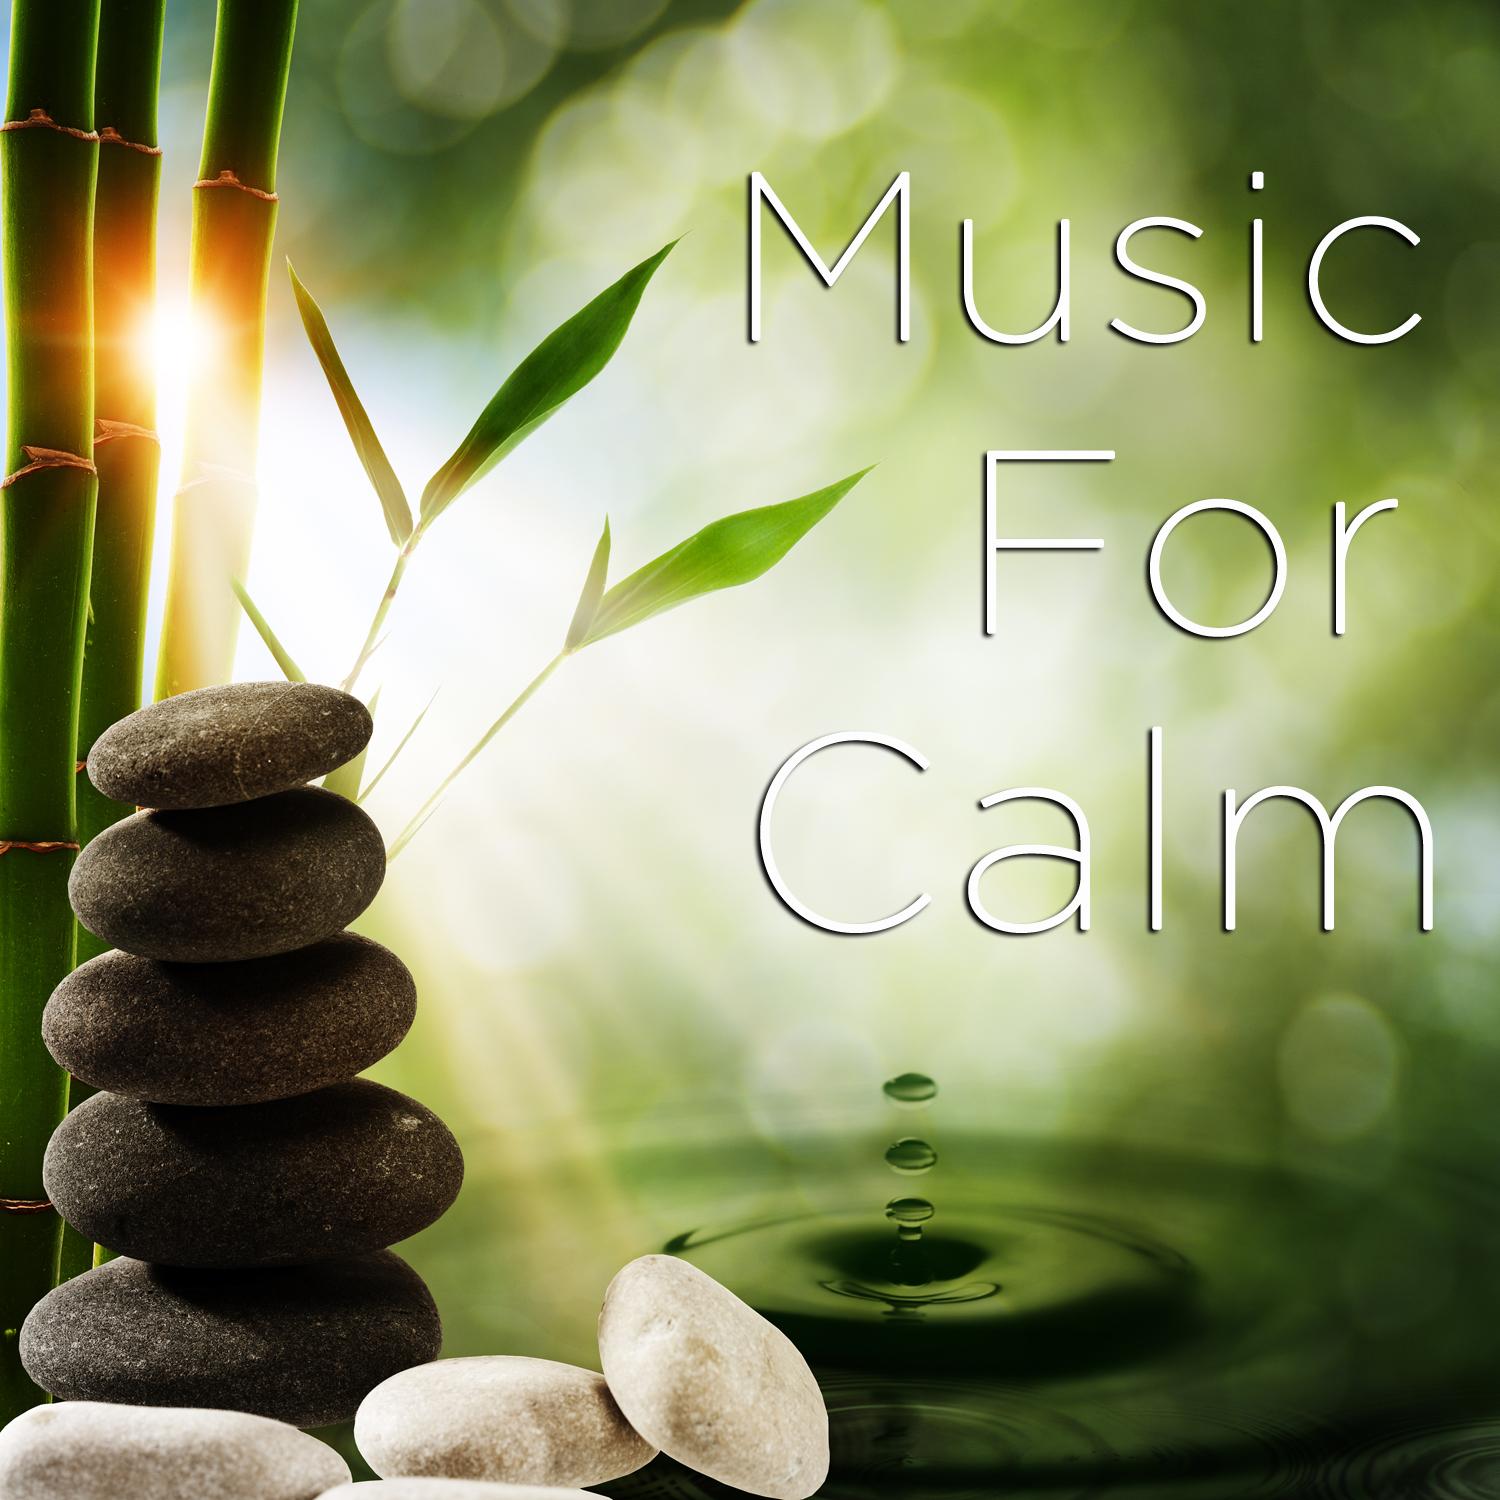 Music for Calm: Relaxing Music, Nature Sounds, Meditation Music